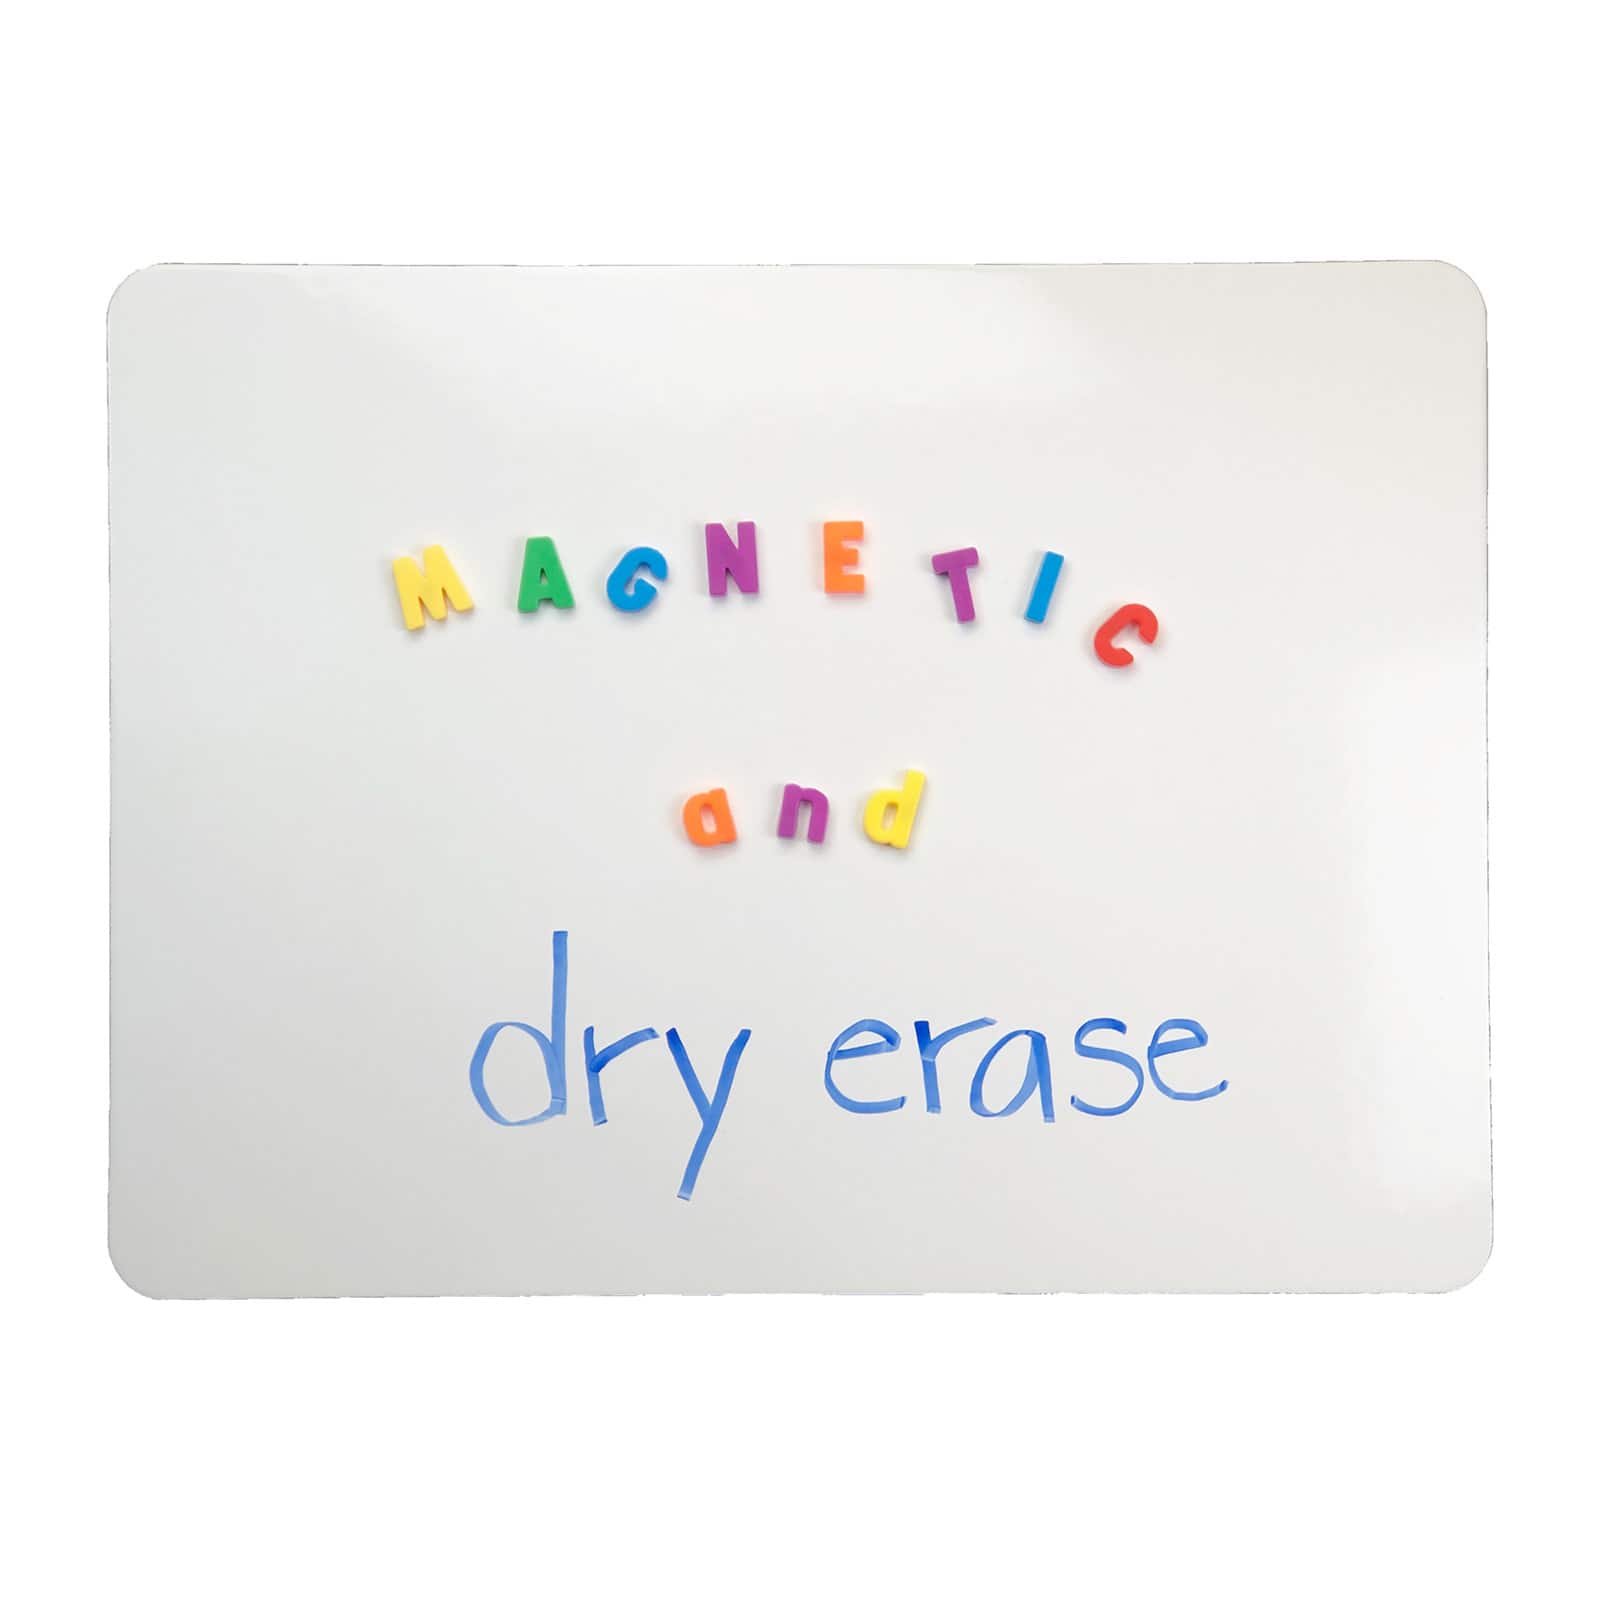 Flipside Products 9&#x22; x 12&#x22; Magnetic Dry Erase Boards, 3ct.